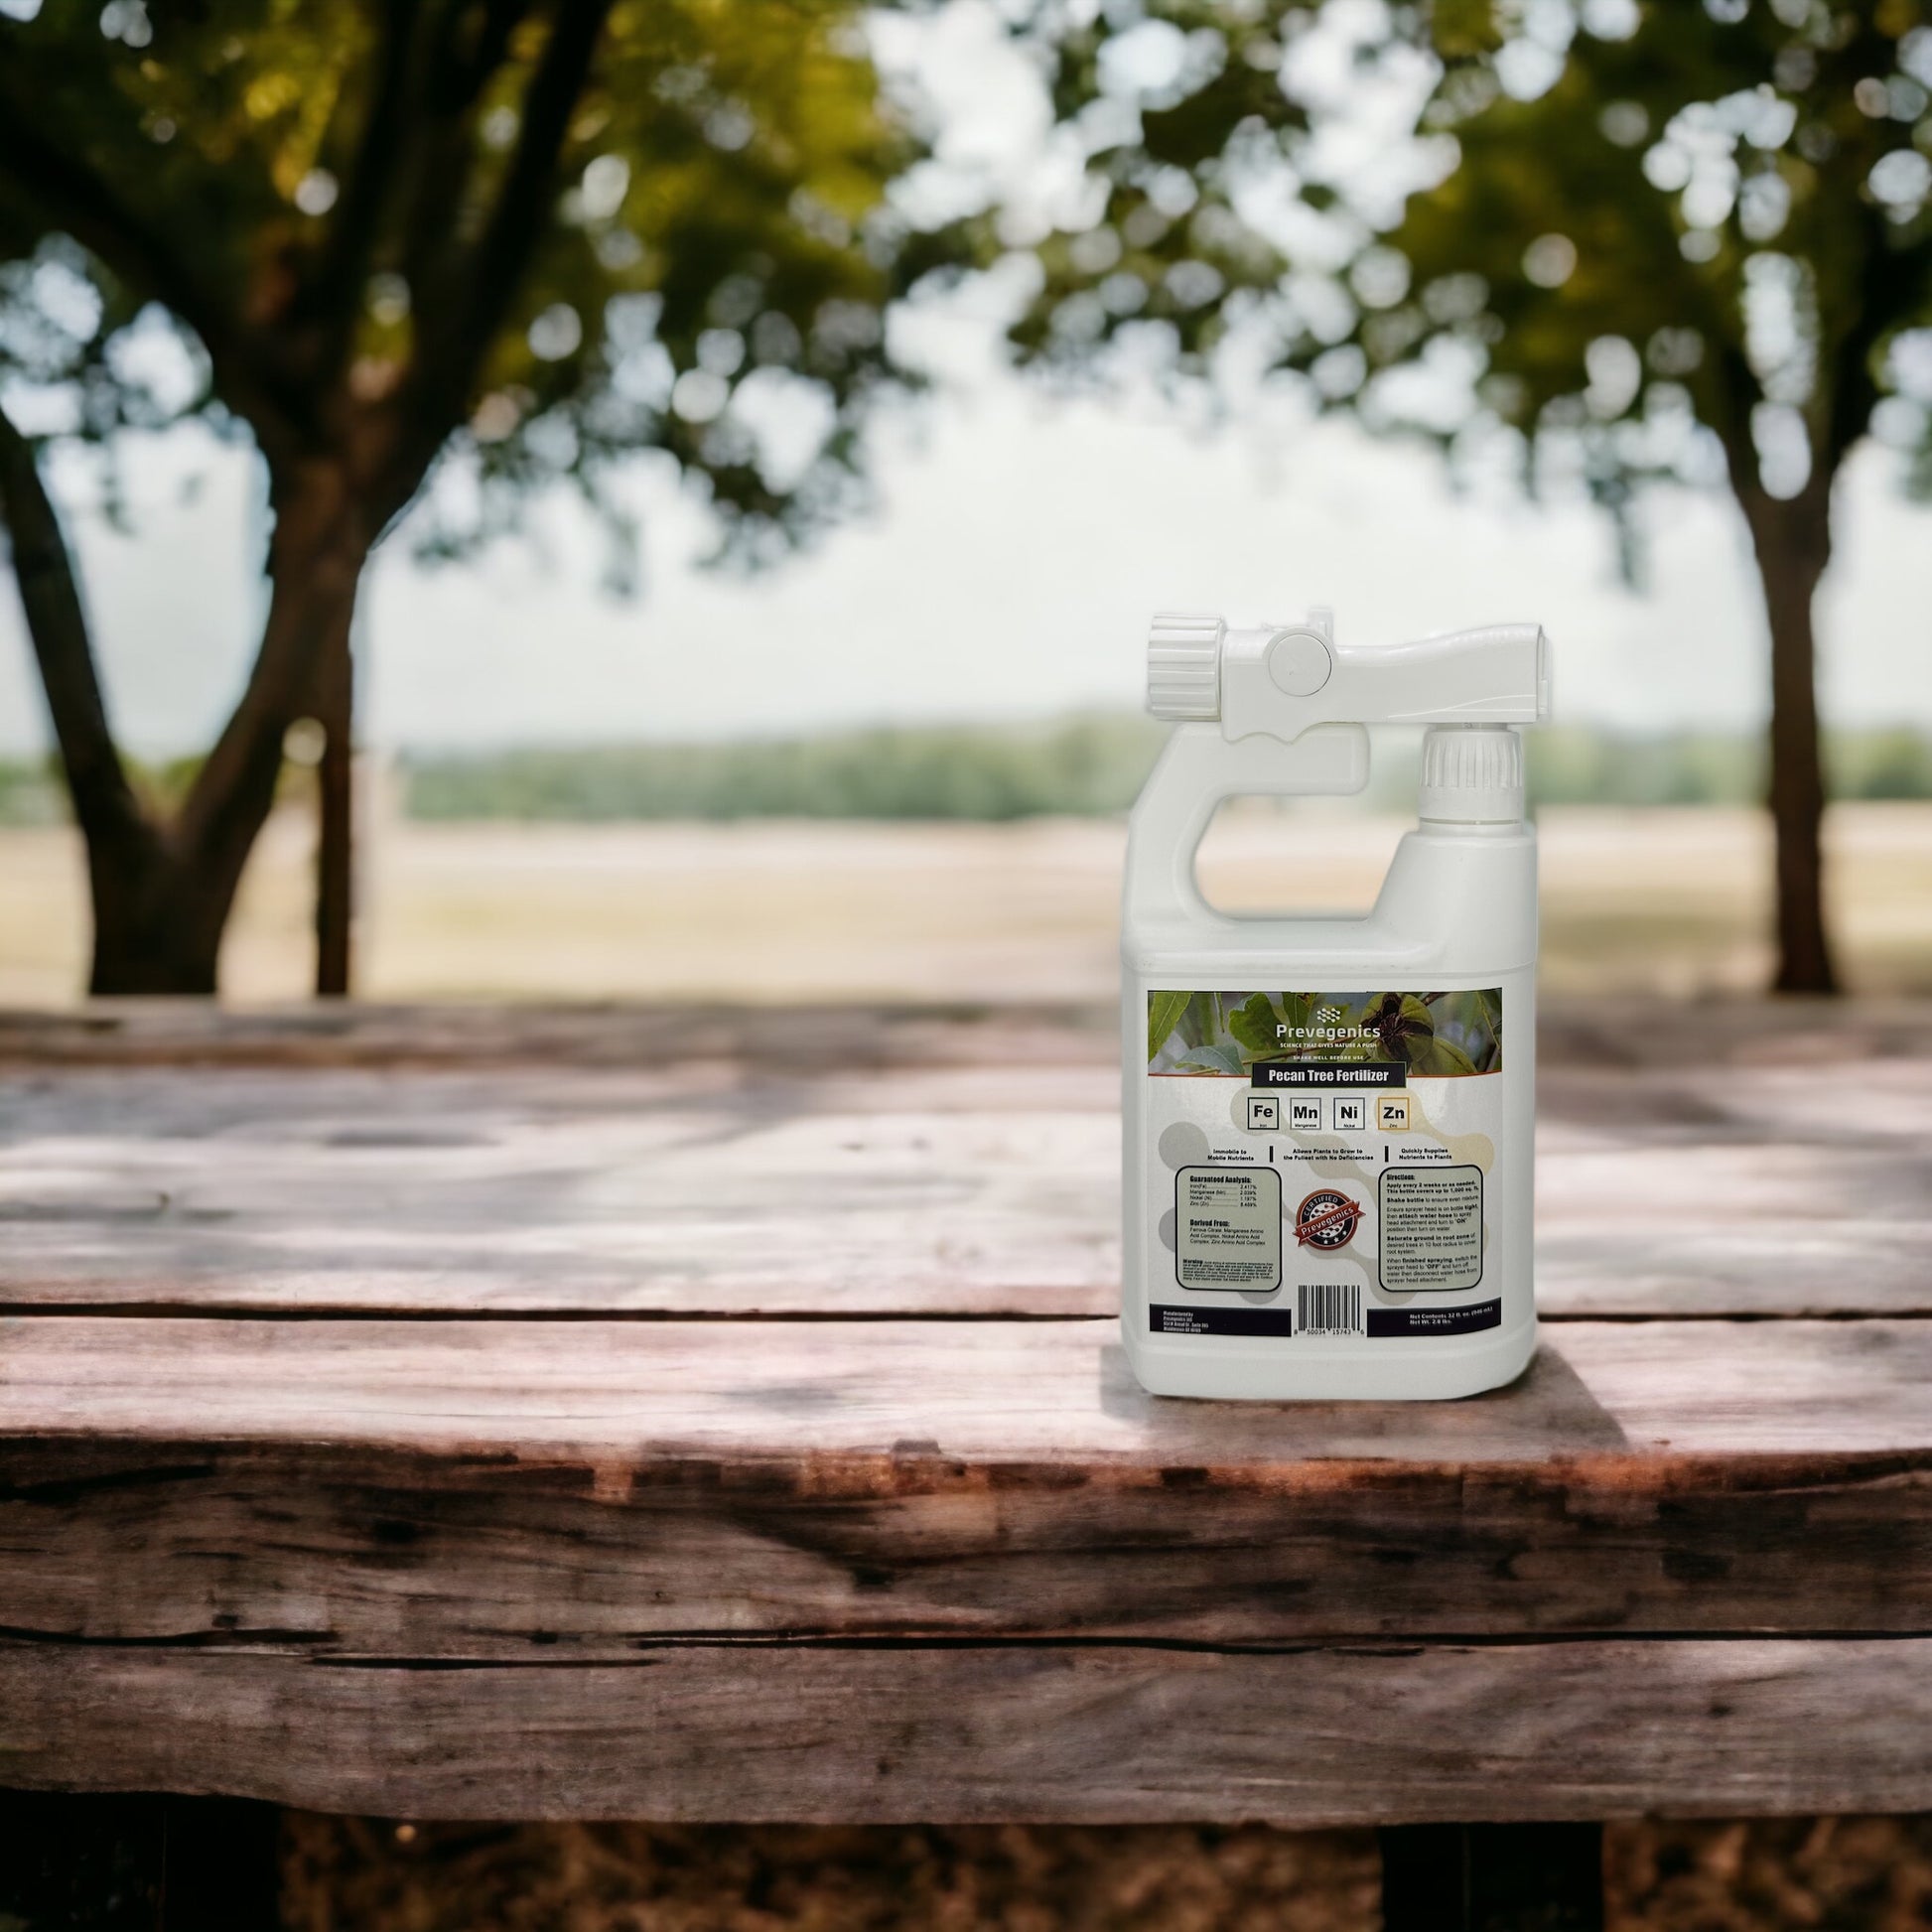 prevegenics product on a wooden table with trees as background